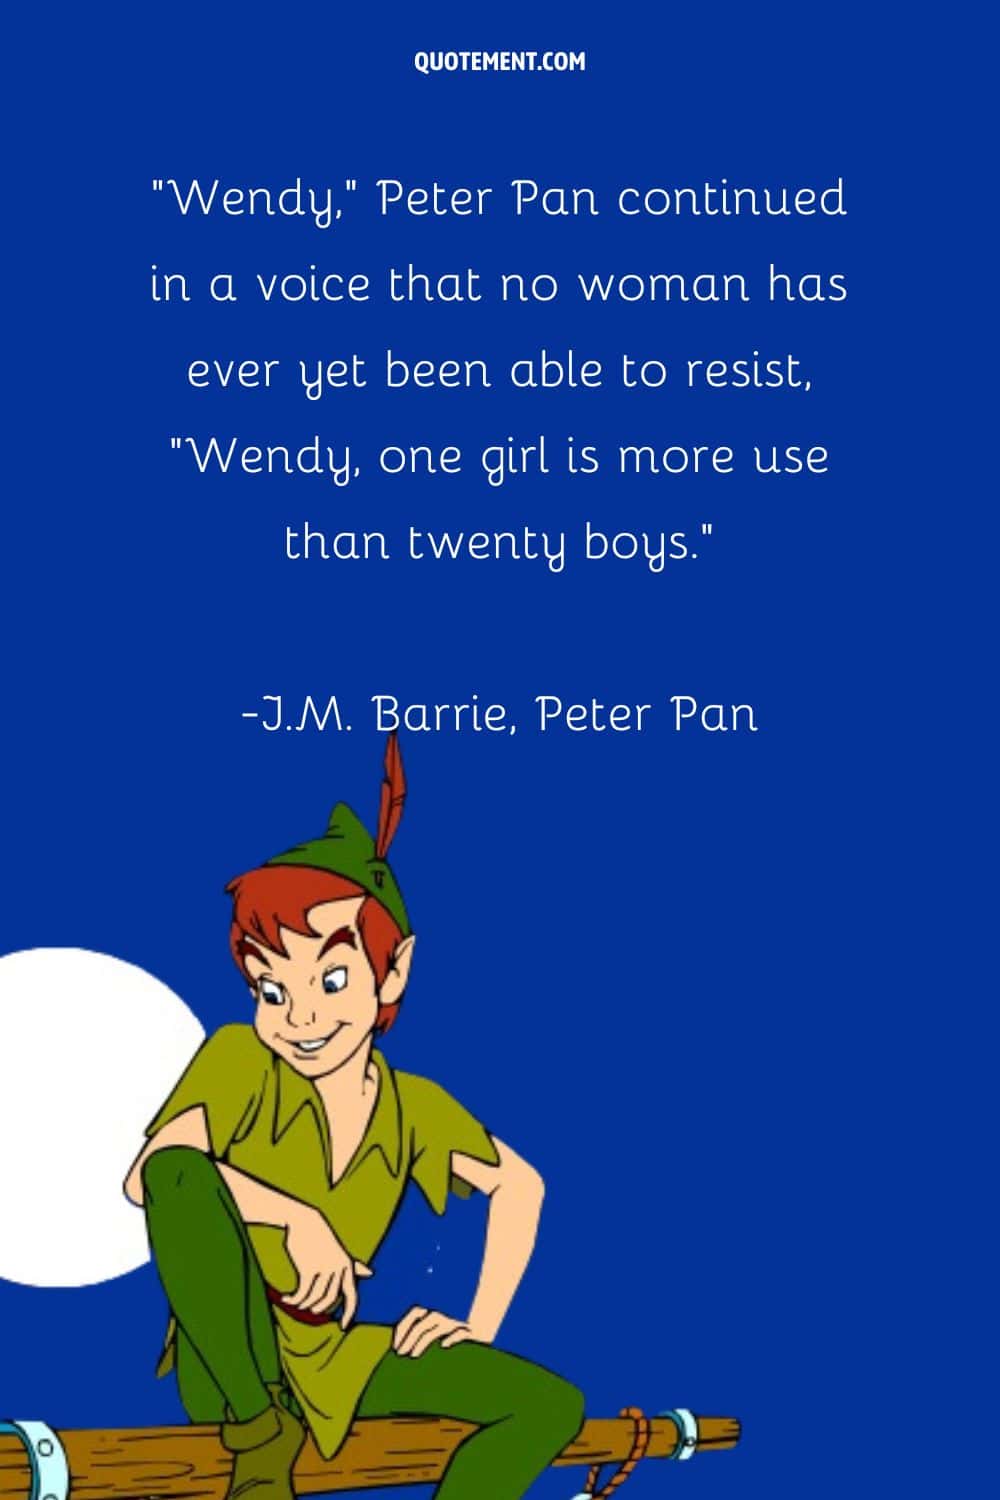 “Wendy, Peter Pan continued in a voice that no woman has ever yet been able to resist, Wendy, one girl is more use than twenty boys.” ― J.M. Barrie, Peter Pan